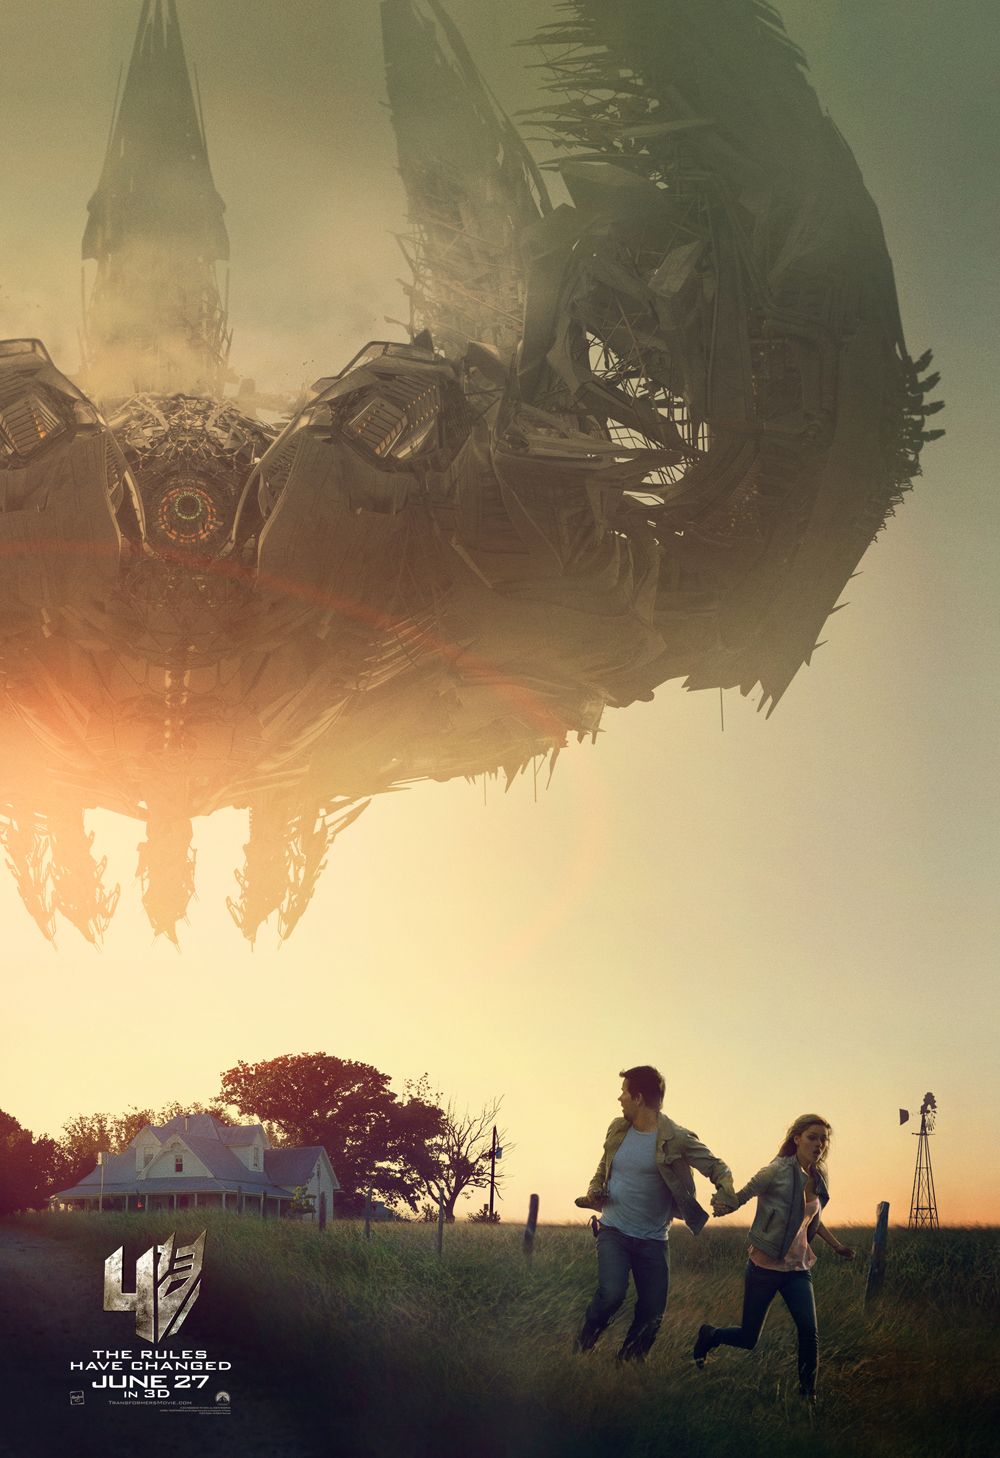 TRANSFORMERS: AGE OF EXTINCTION Propaganda Posters and Video | Collider